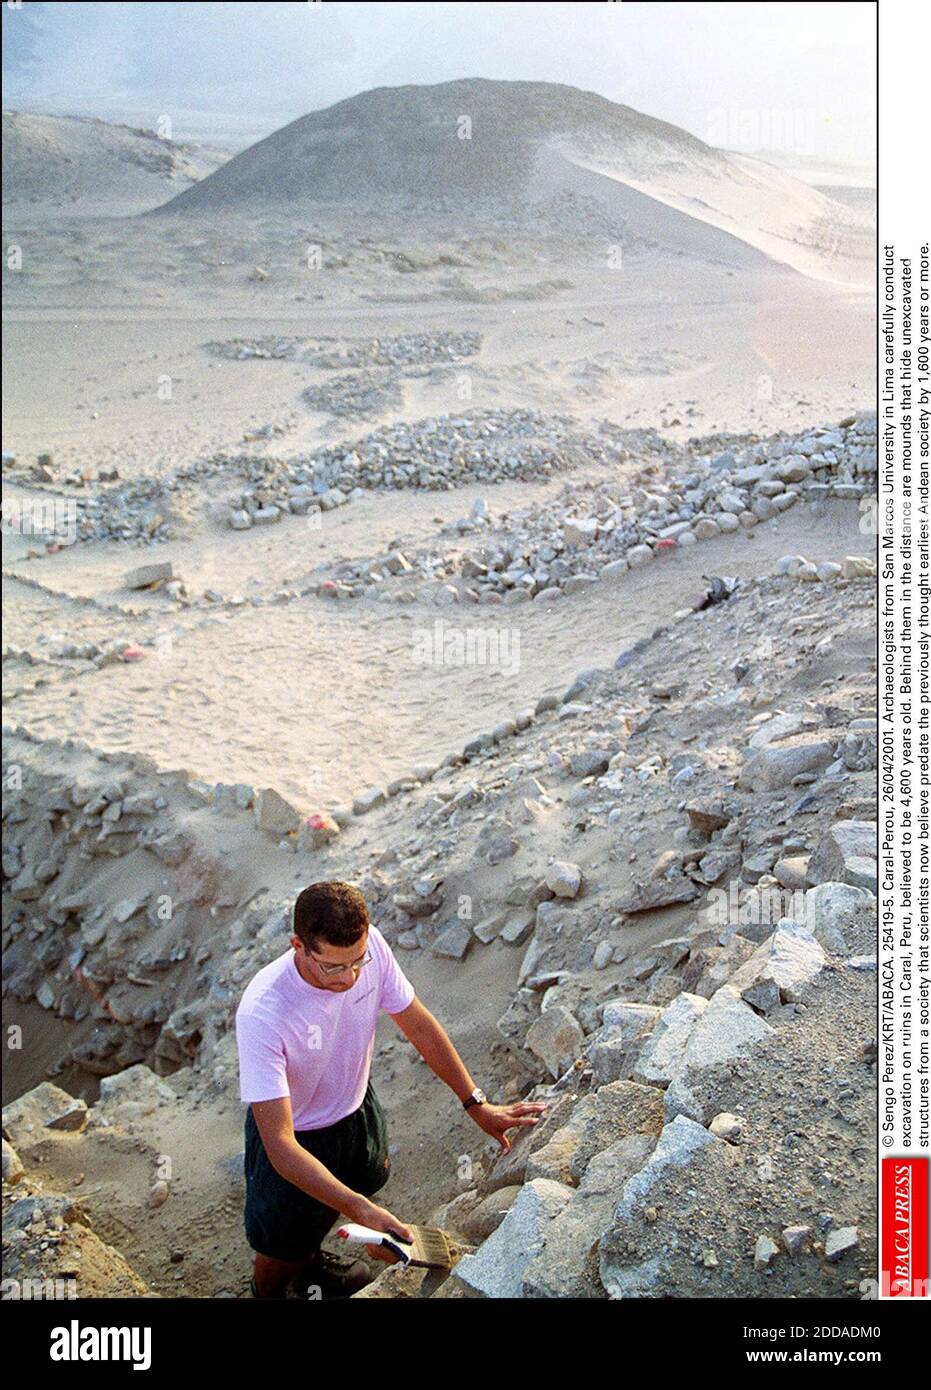 NO FILM, NO VIDEO, NO TV, NO DOCUMENTARY - © Sengo Perez/KRT/ABACA. 25419-5. Caral-Perou, 26/04/2001. Archaeologists from San Marcos University in Lima carefully conduct excavation on ruins in Caral, Peru, believed to be 4,600 years old. Behind them in the distance are mounds that hide unexcavated Stock Photo